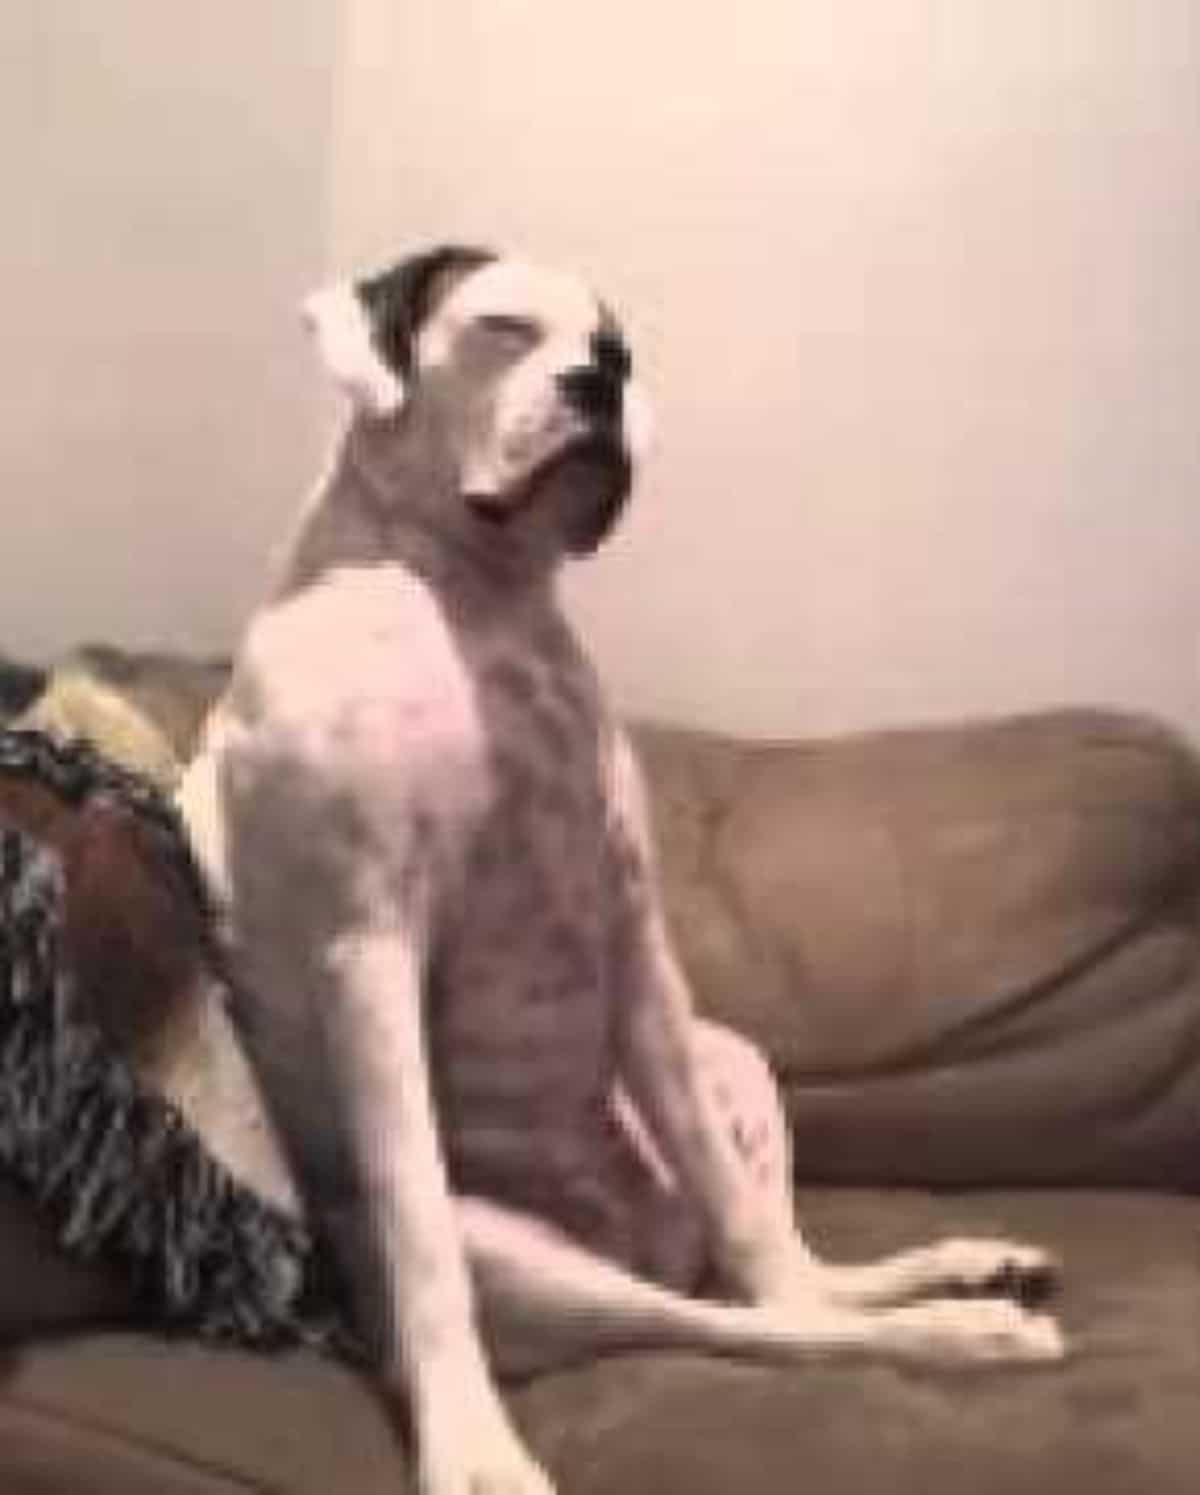 large black and white dog sitting on its haunches on a brown sofa